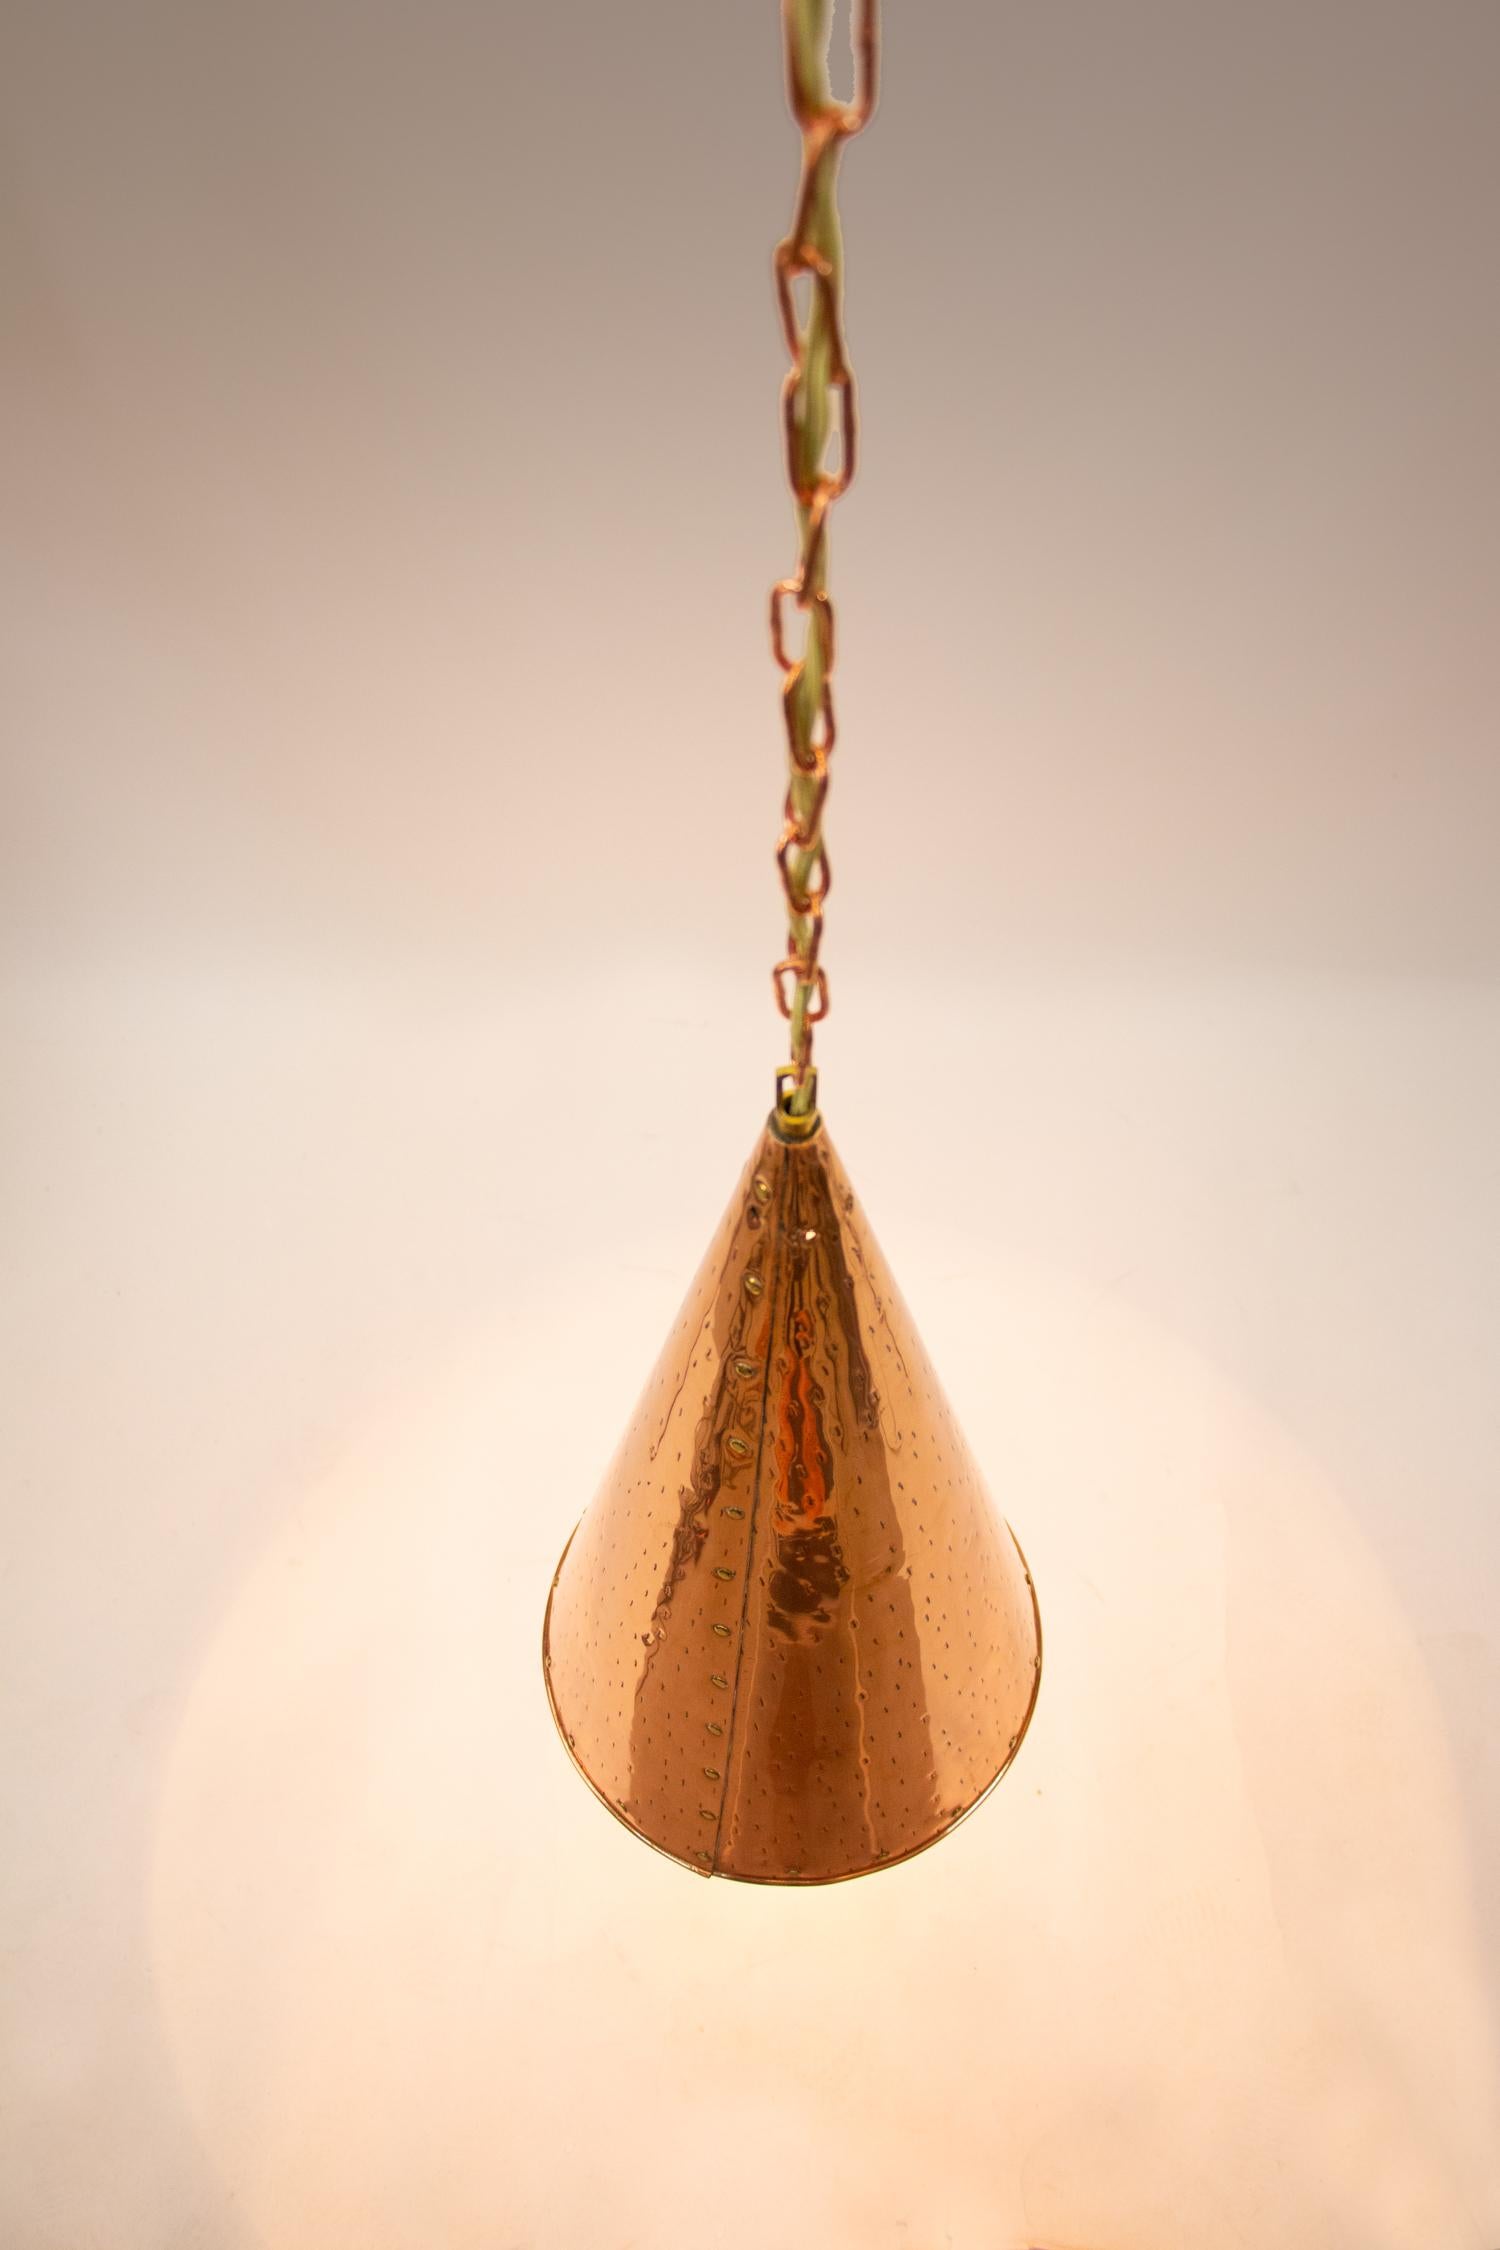 Pair of Danish Hammered Copper Cone Pendant Lamps by E.S Horn Aalestrup, 1950s For Sale 2